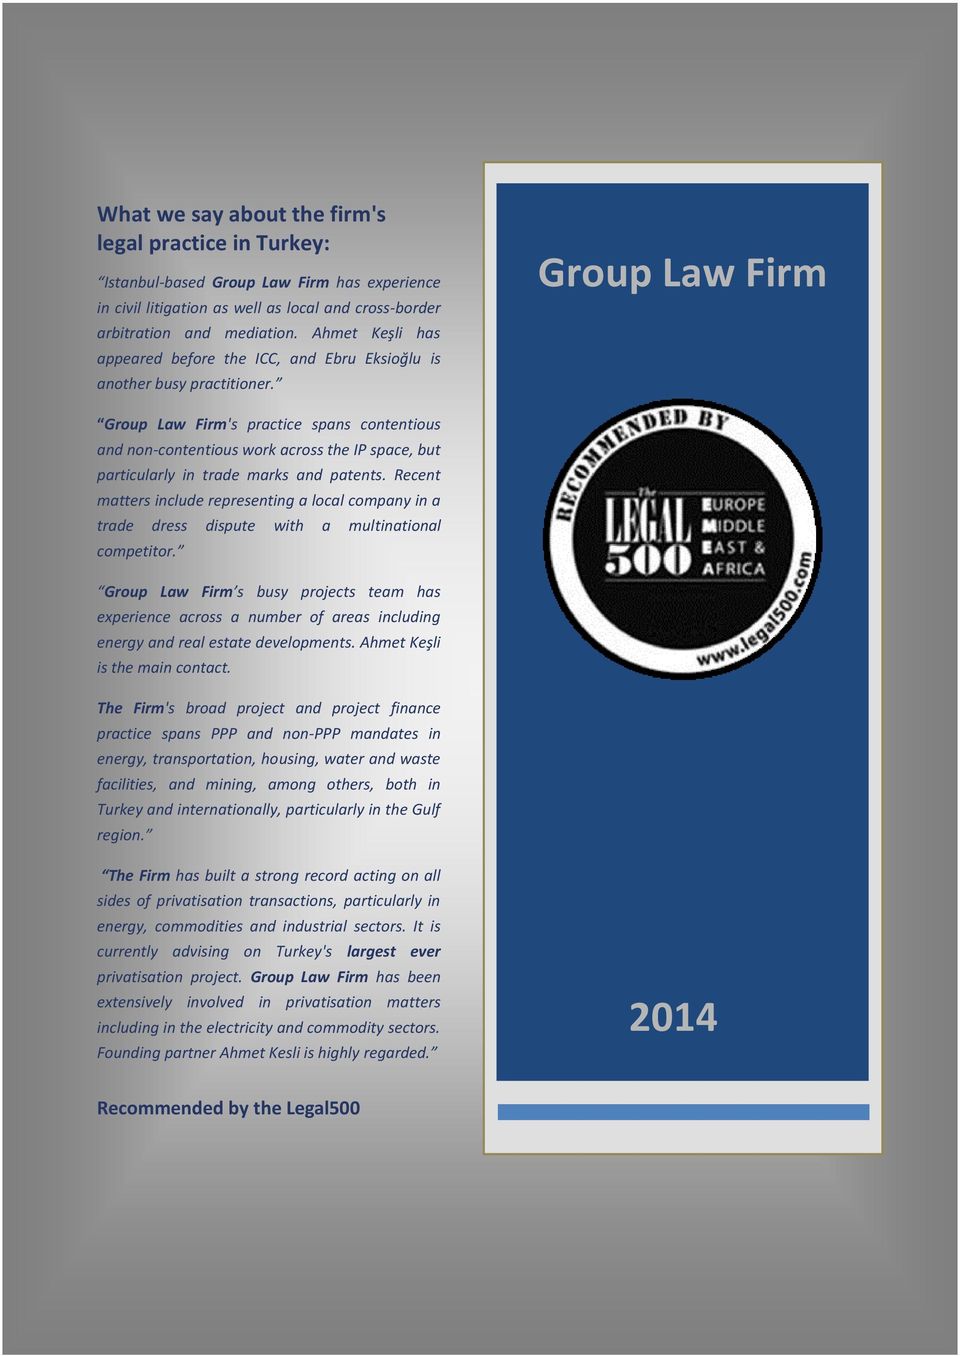 Group Law Firm Group Law Firm's practice spans contentious and non-contentious work across the IP space, but particularly in trade marks and patents.